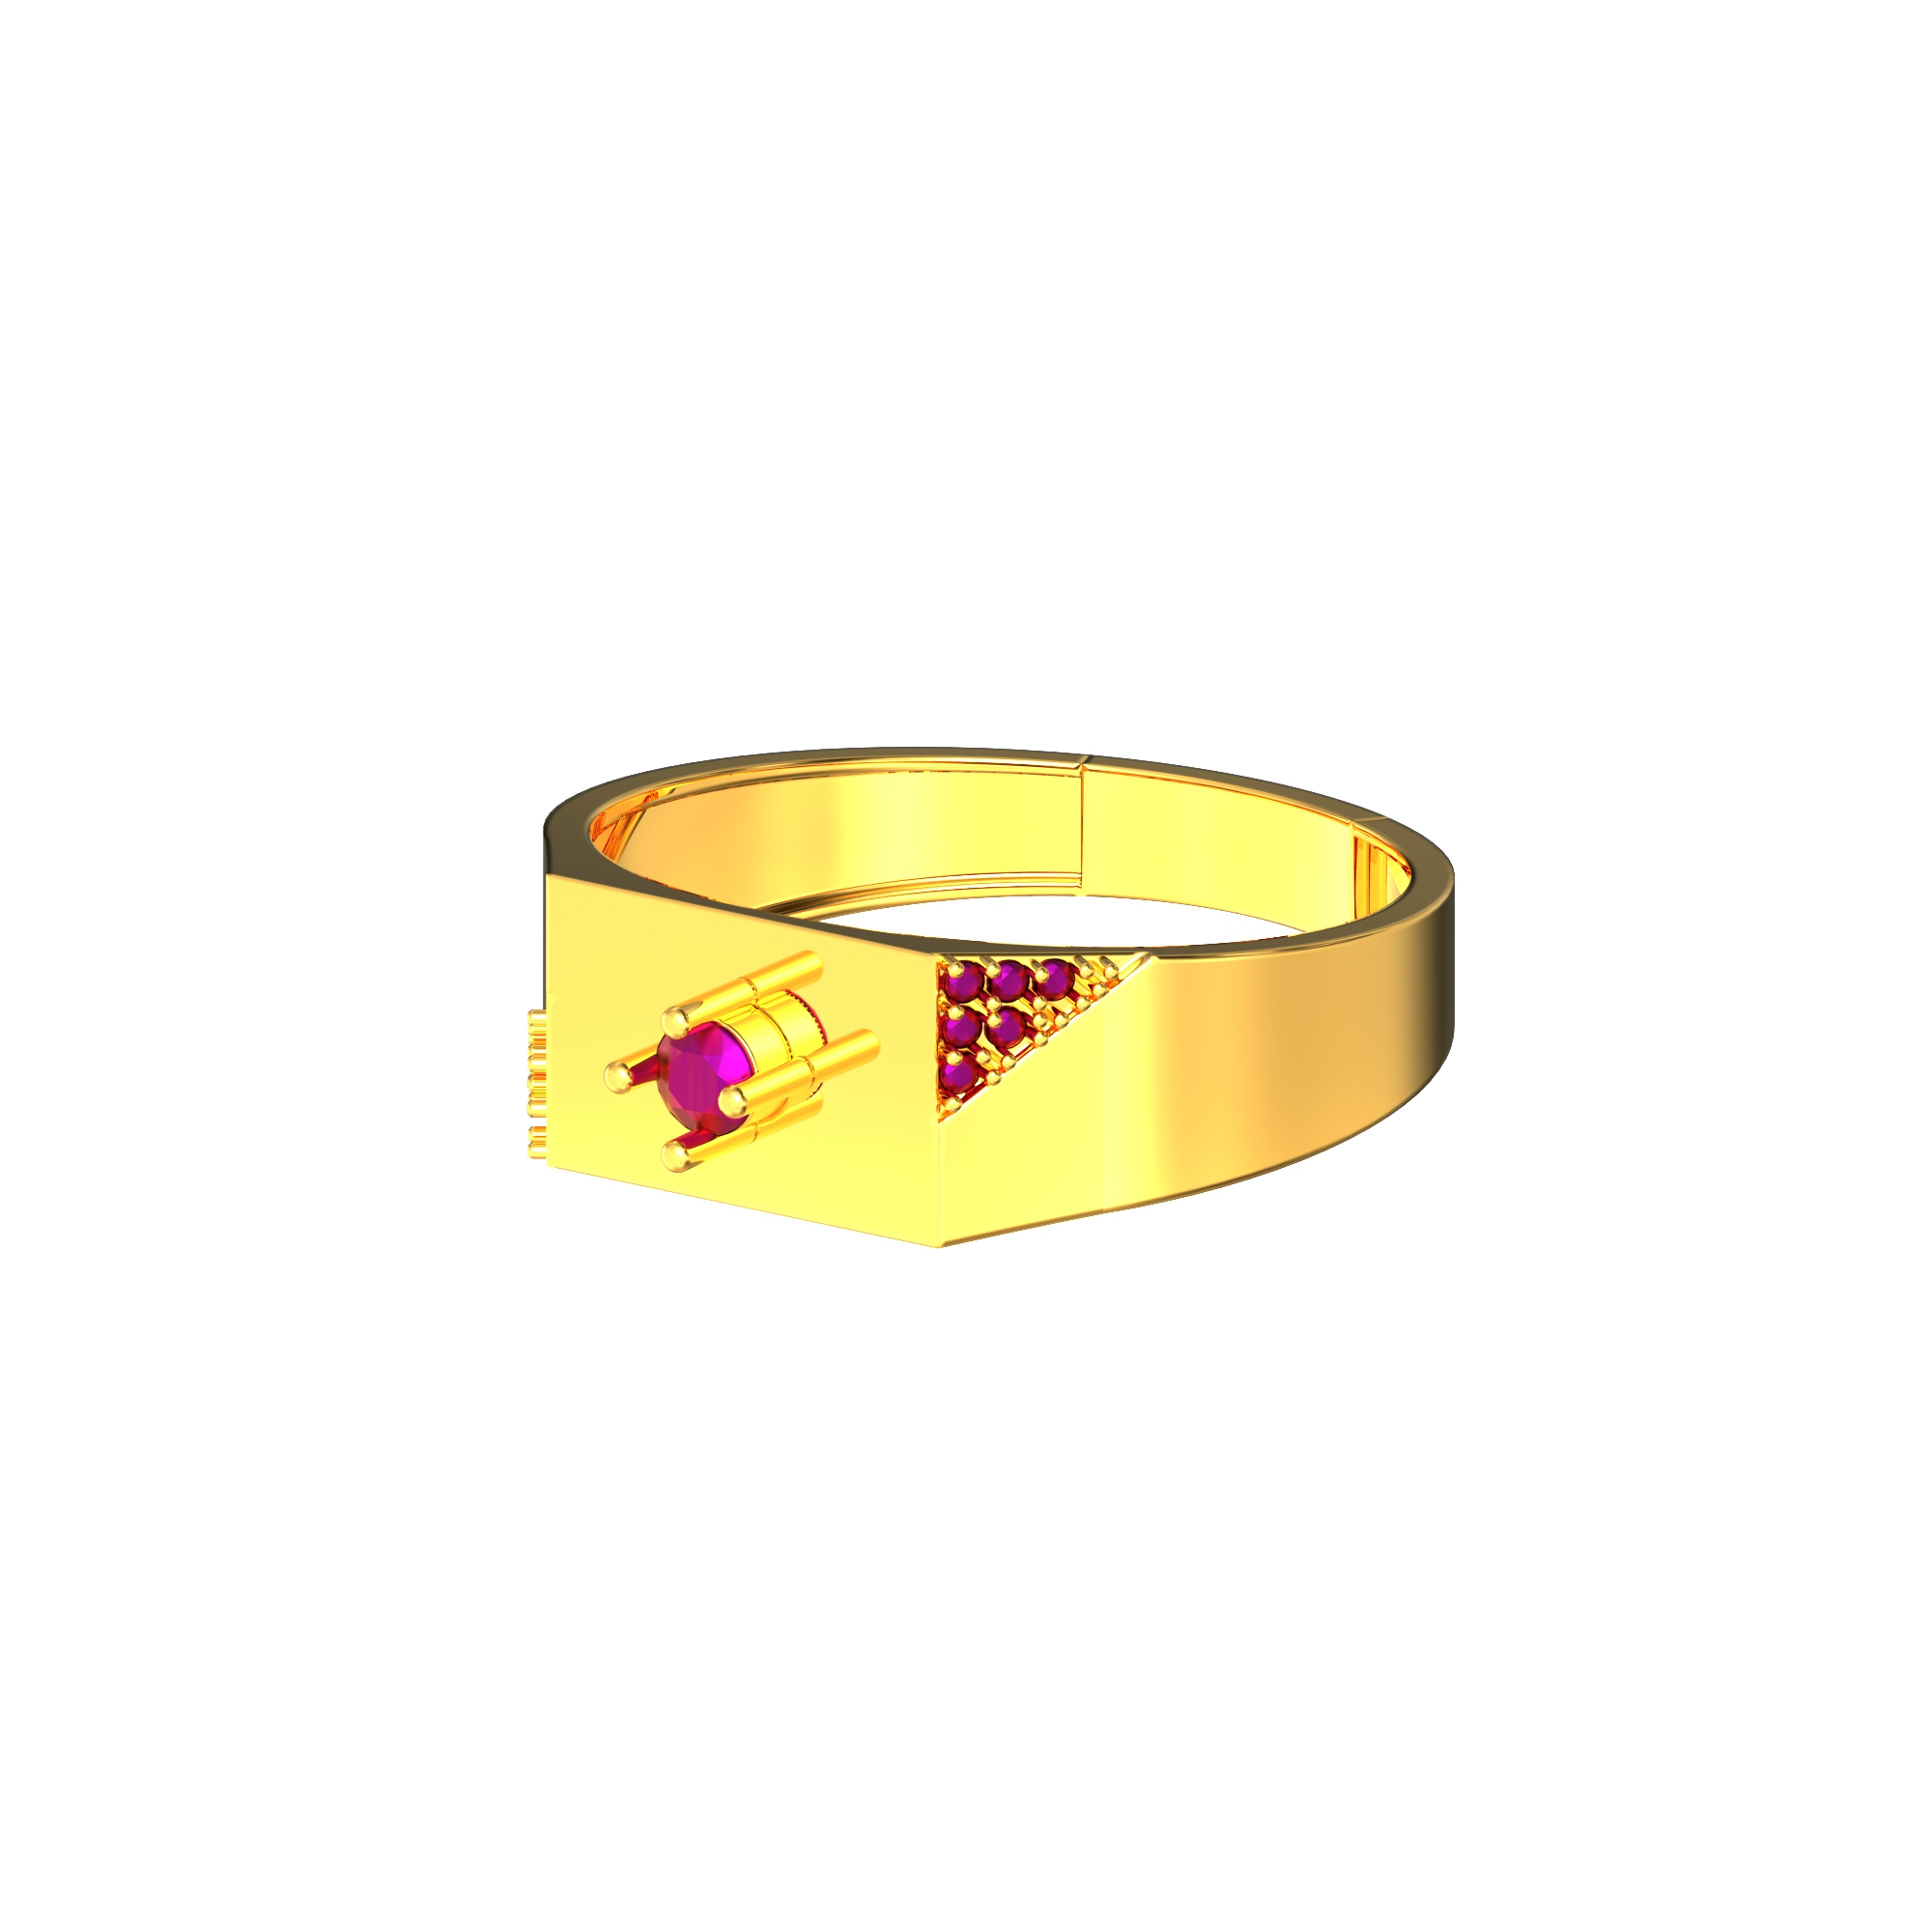 Gents Gold Ring with Geometric Design-06-01